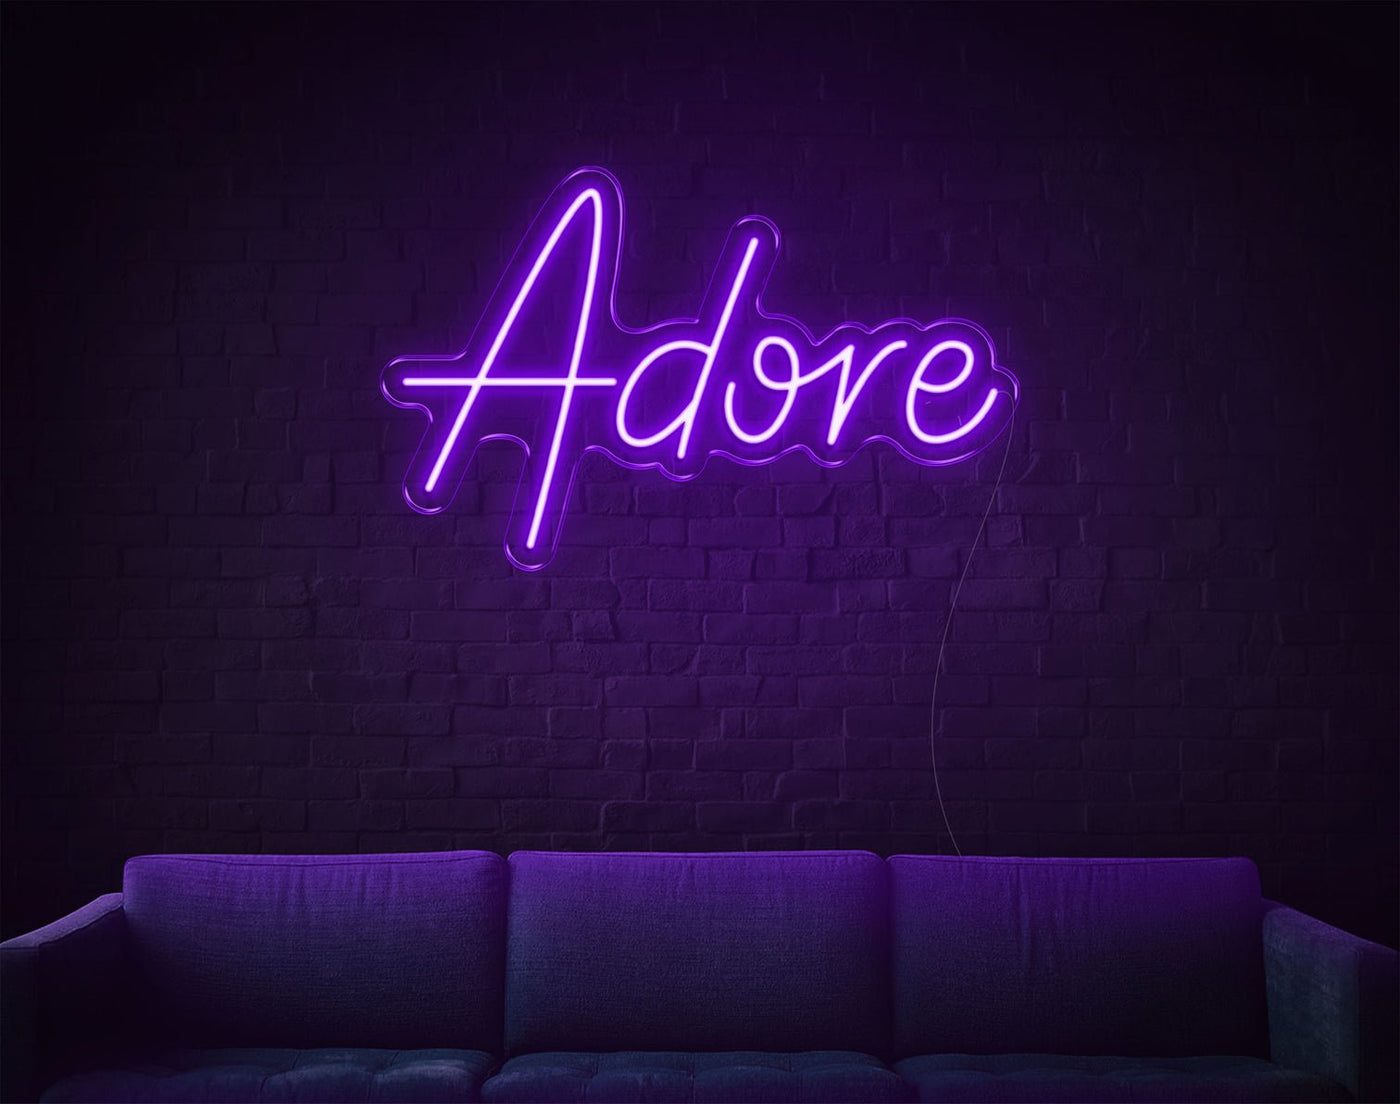 Adore LED Neon Sign - 15inch x 24inchPurple -LED Neon Signs-Item-217-13